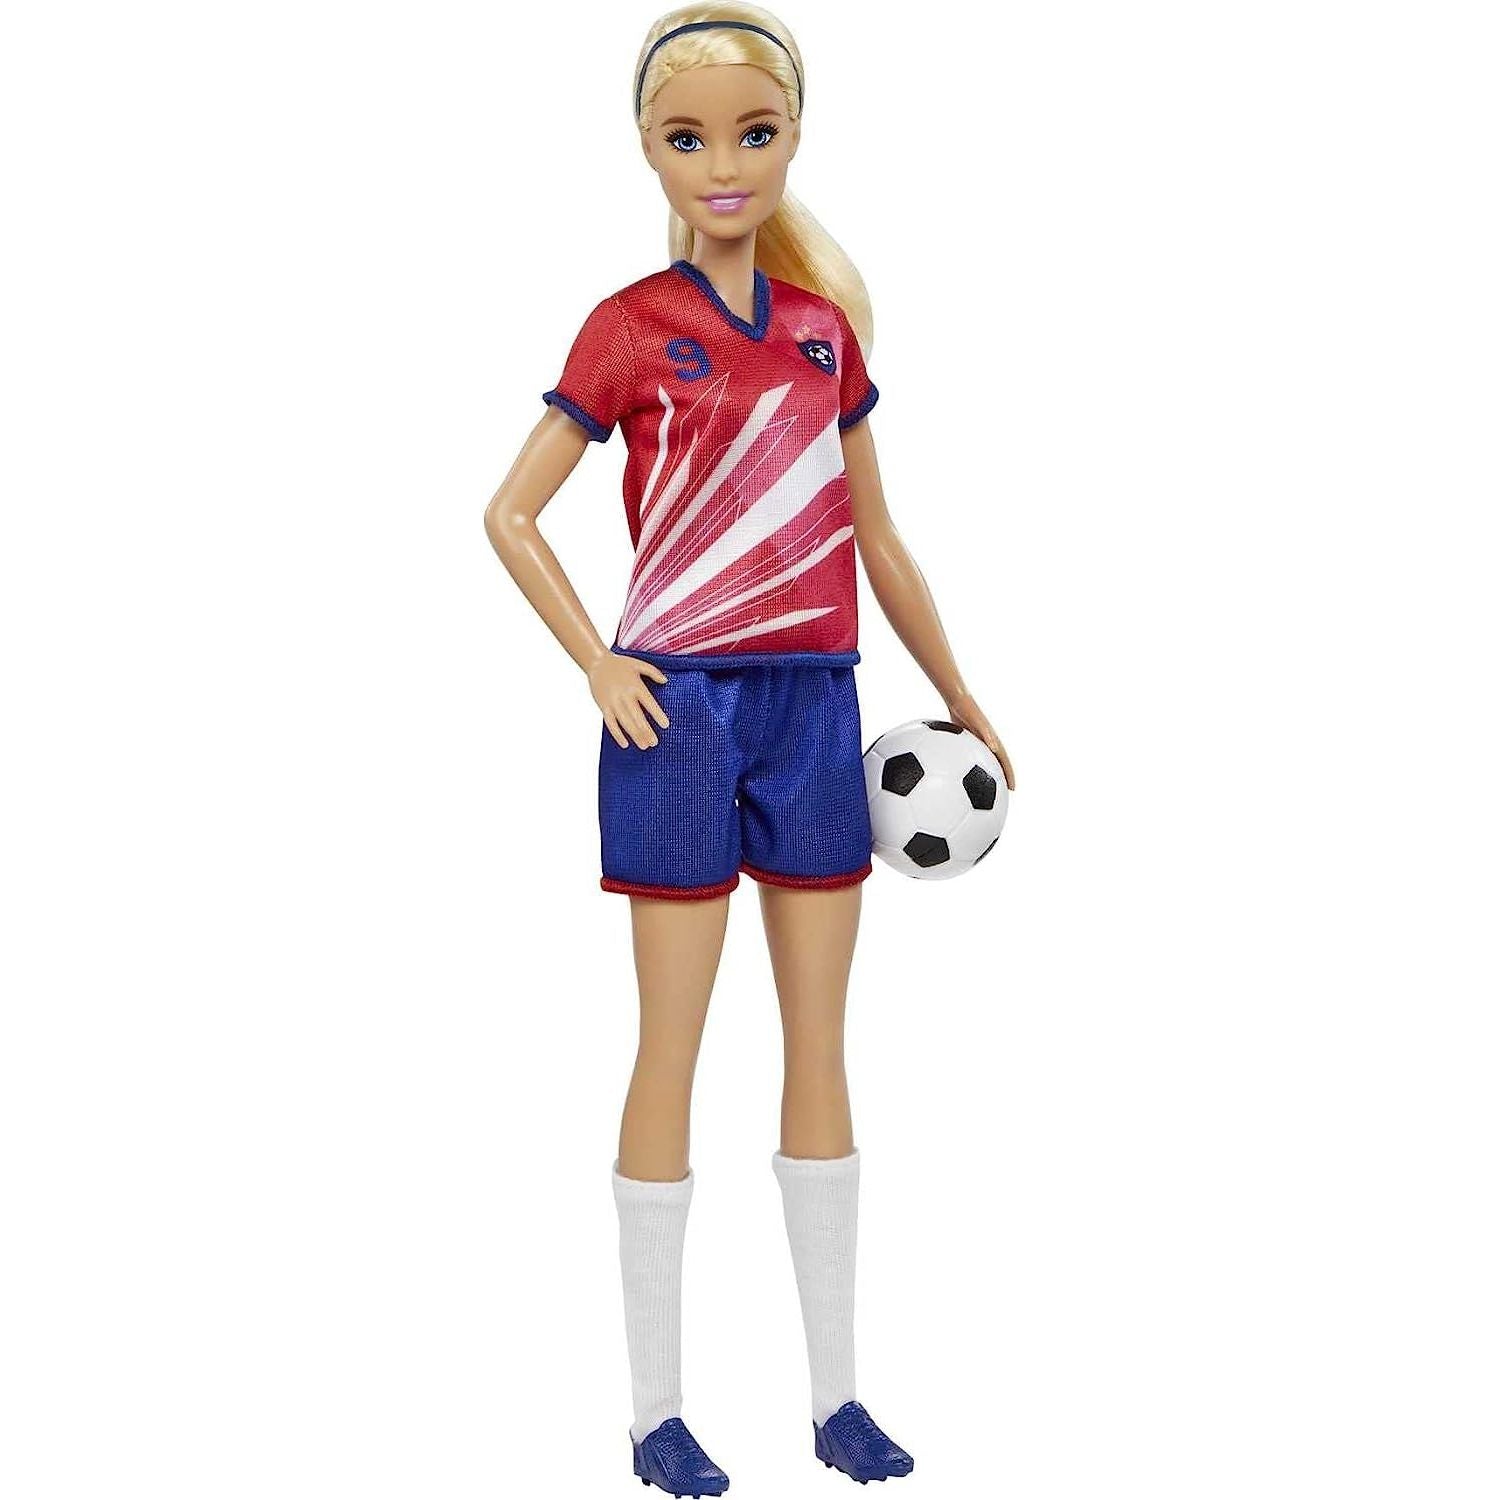 Mattel Barbie Soccer Fashion Doll with Blonde Ponytail, Colorful #9 Uniform, Cleats & Tall Socks, Soccer Ball 11.5 inches